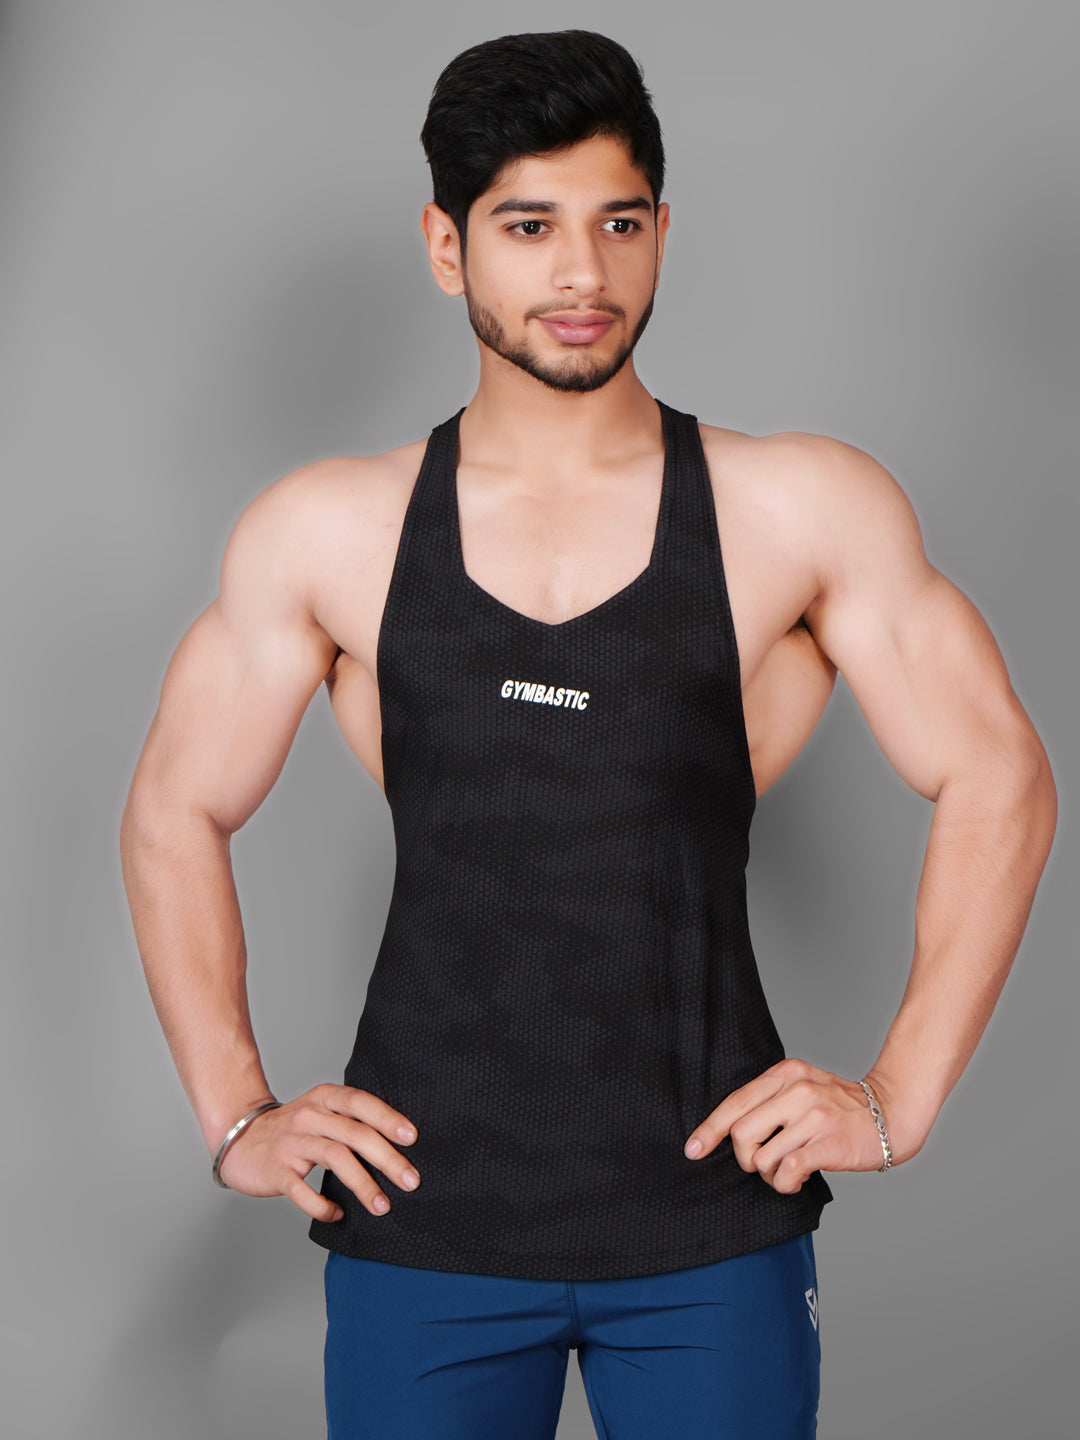 2-COMBO Y-BLACK AND GREEN GYM VEST